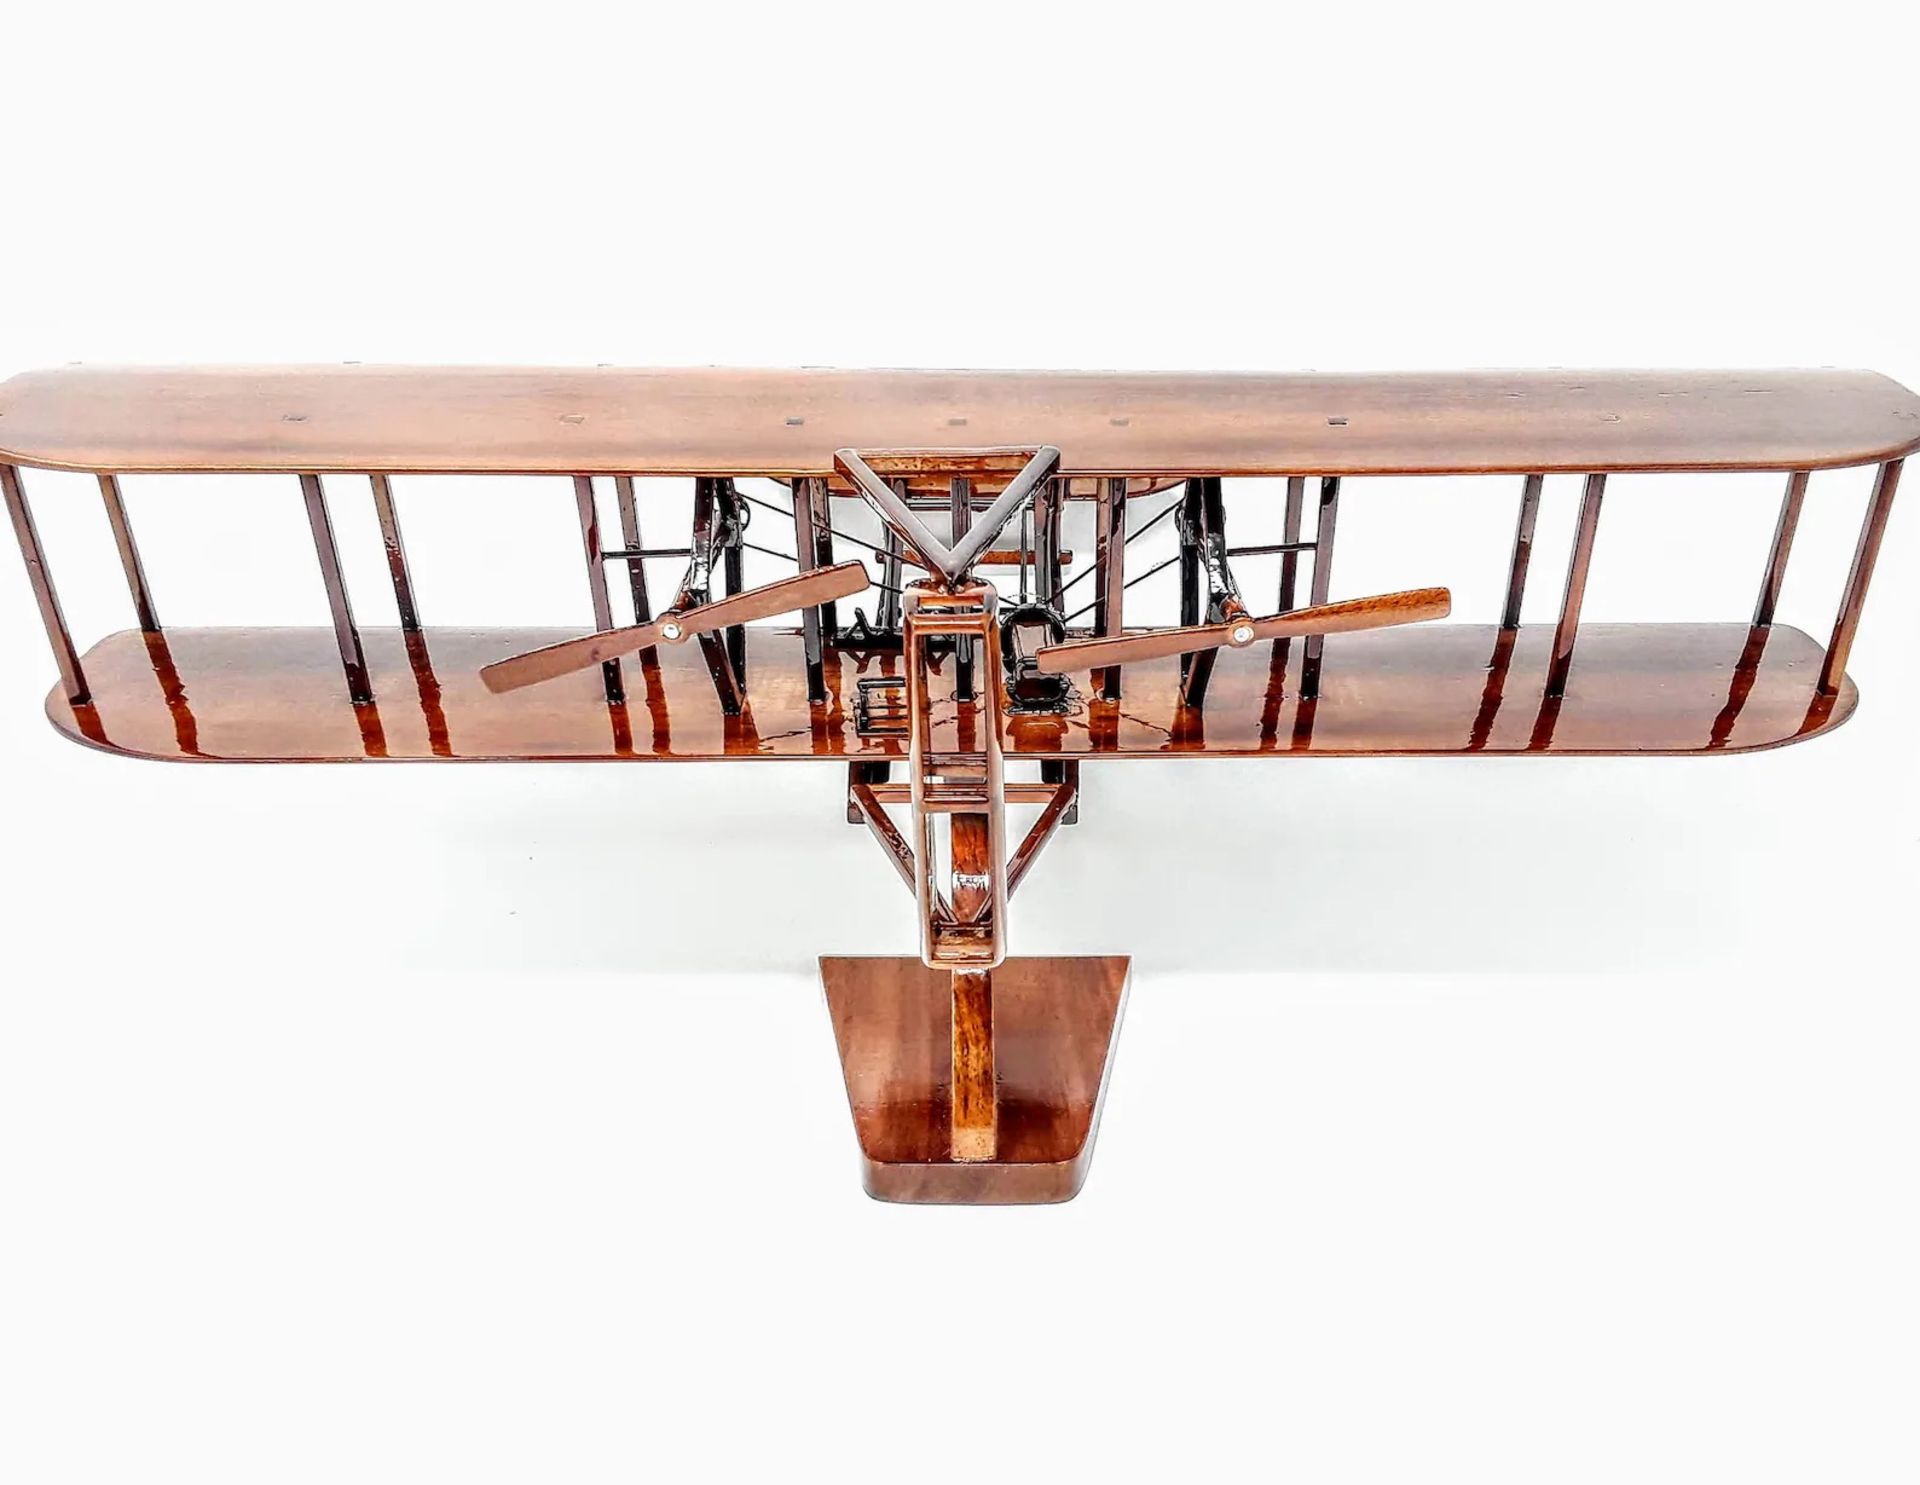 Wright Flyer Wooden Scale Desk Display - Image 2 of 3